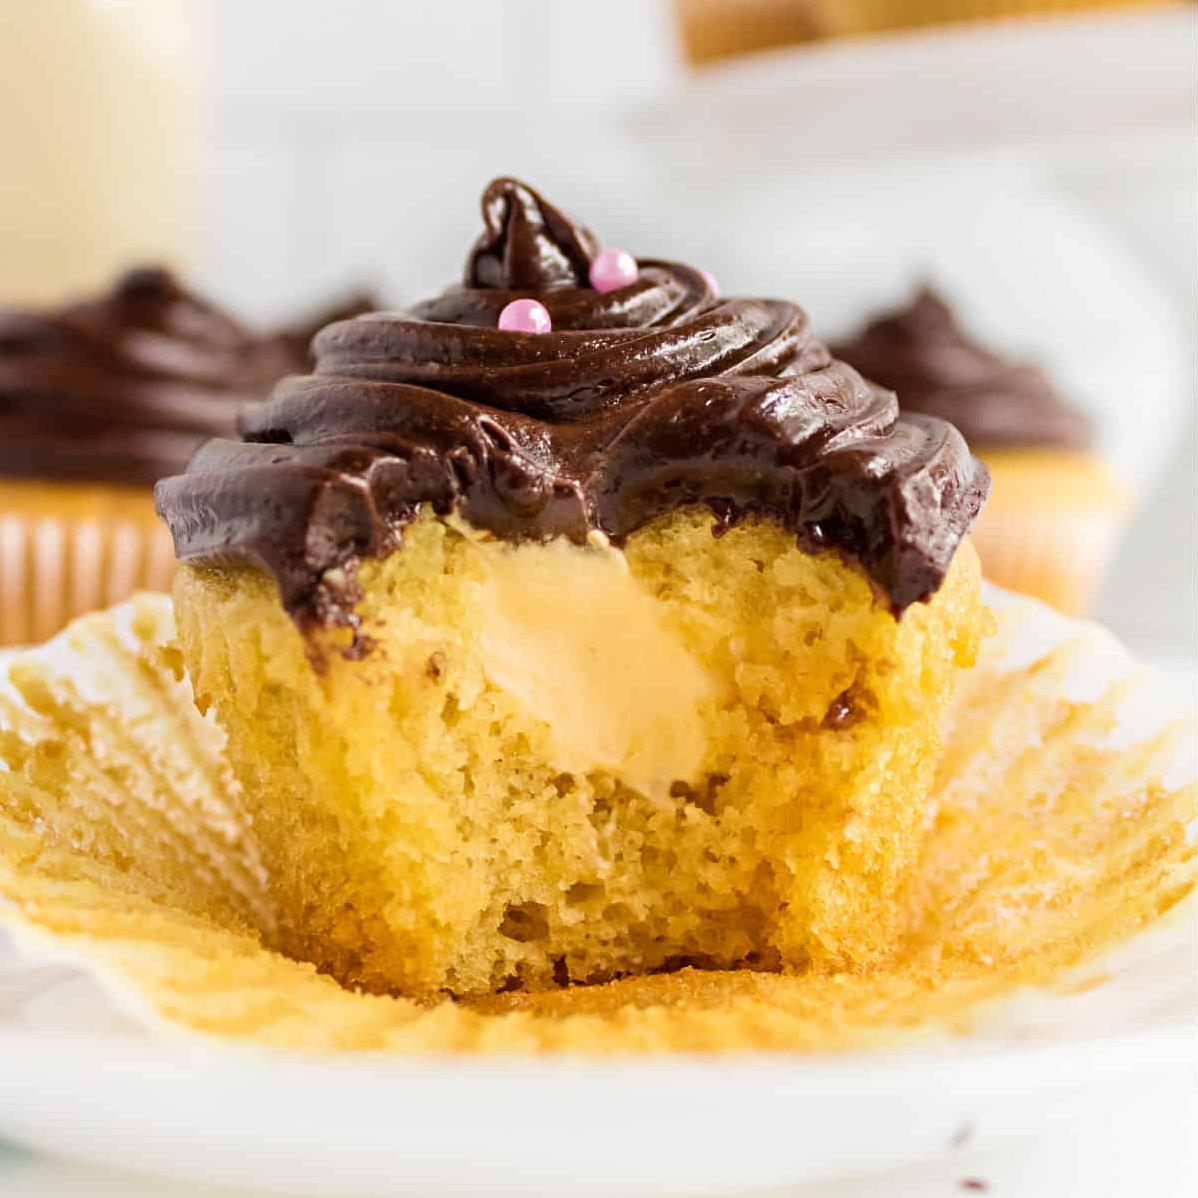  Who needs a cup of coffee when you can have an espresso infused cupcake?